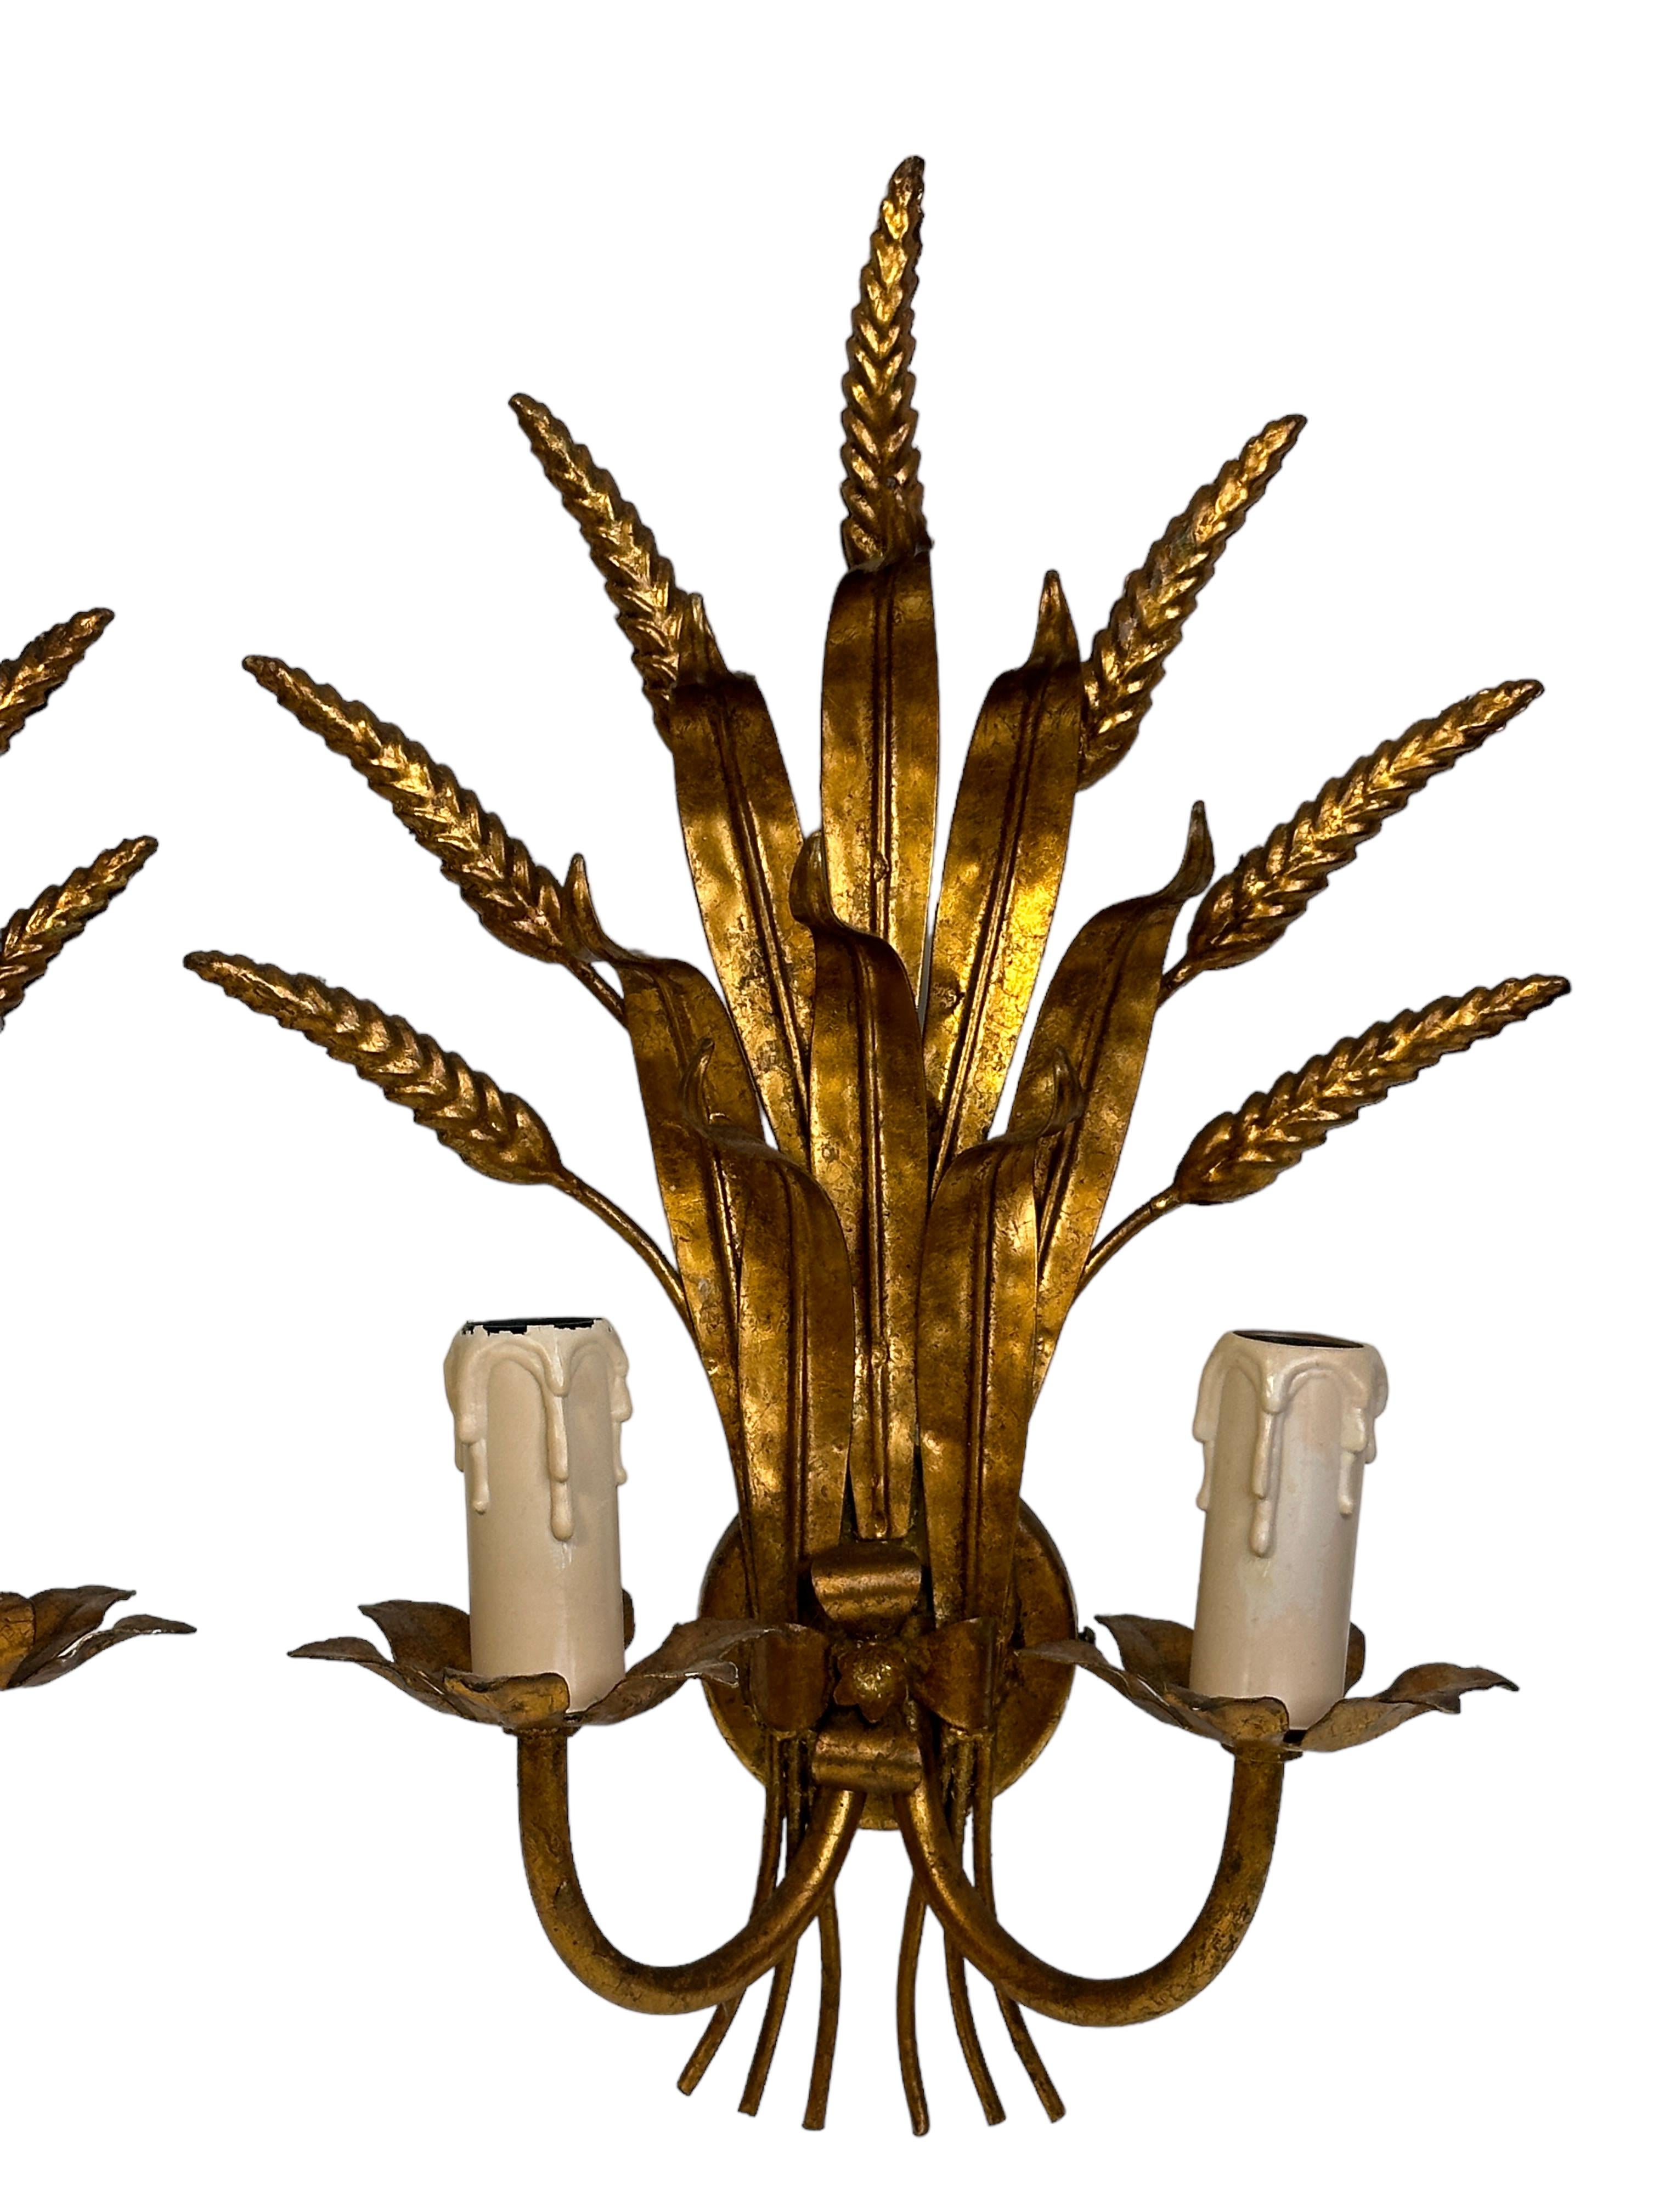 Pair of Wheat Sheaf Two-Light Gilded Tole Sconces by Sölken Leuchten Germany In Good Condition For Sale In Nuernberg, DE